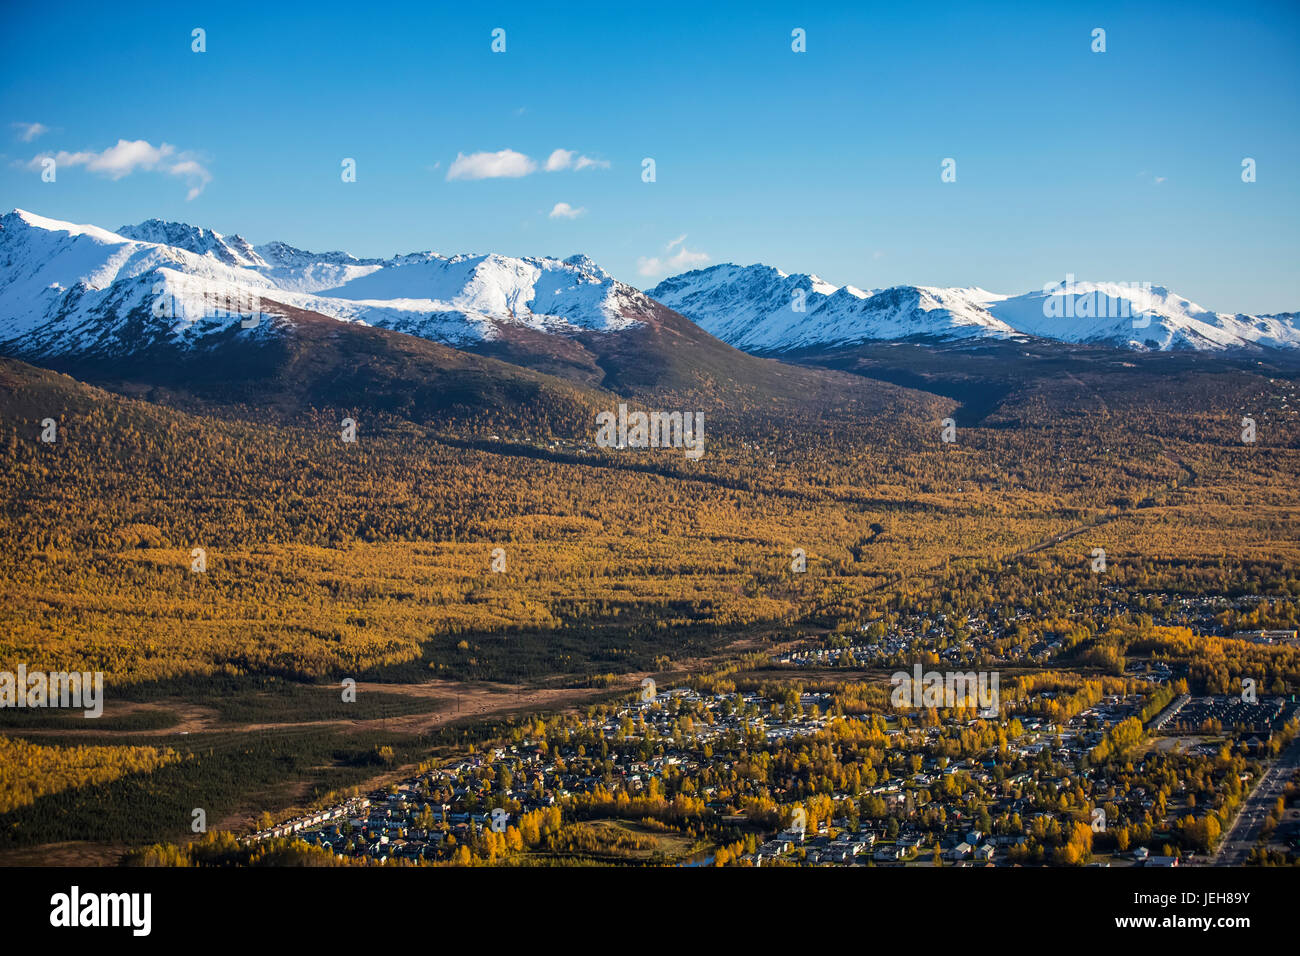 Eagle River Valley, Homes Nestled Among The Trees In The Foreground, Autumn Coloured Trees Filling The Valley, Snow Covering The Chugach Mountains ... Stock Photo